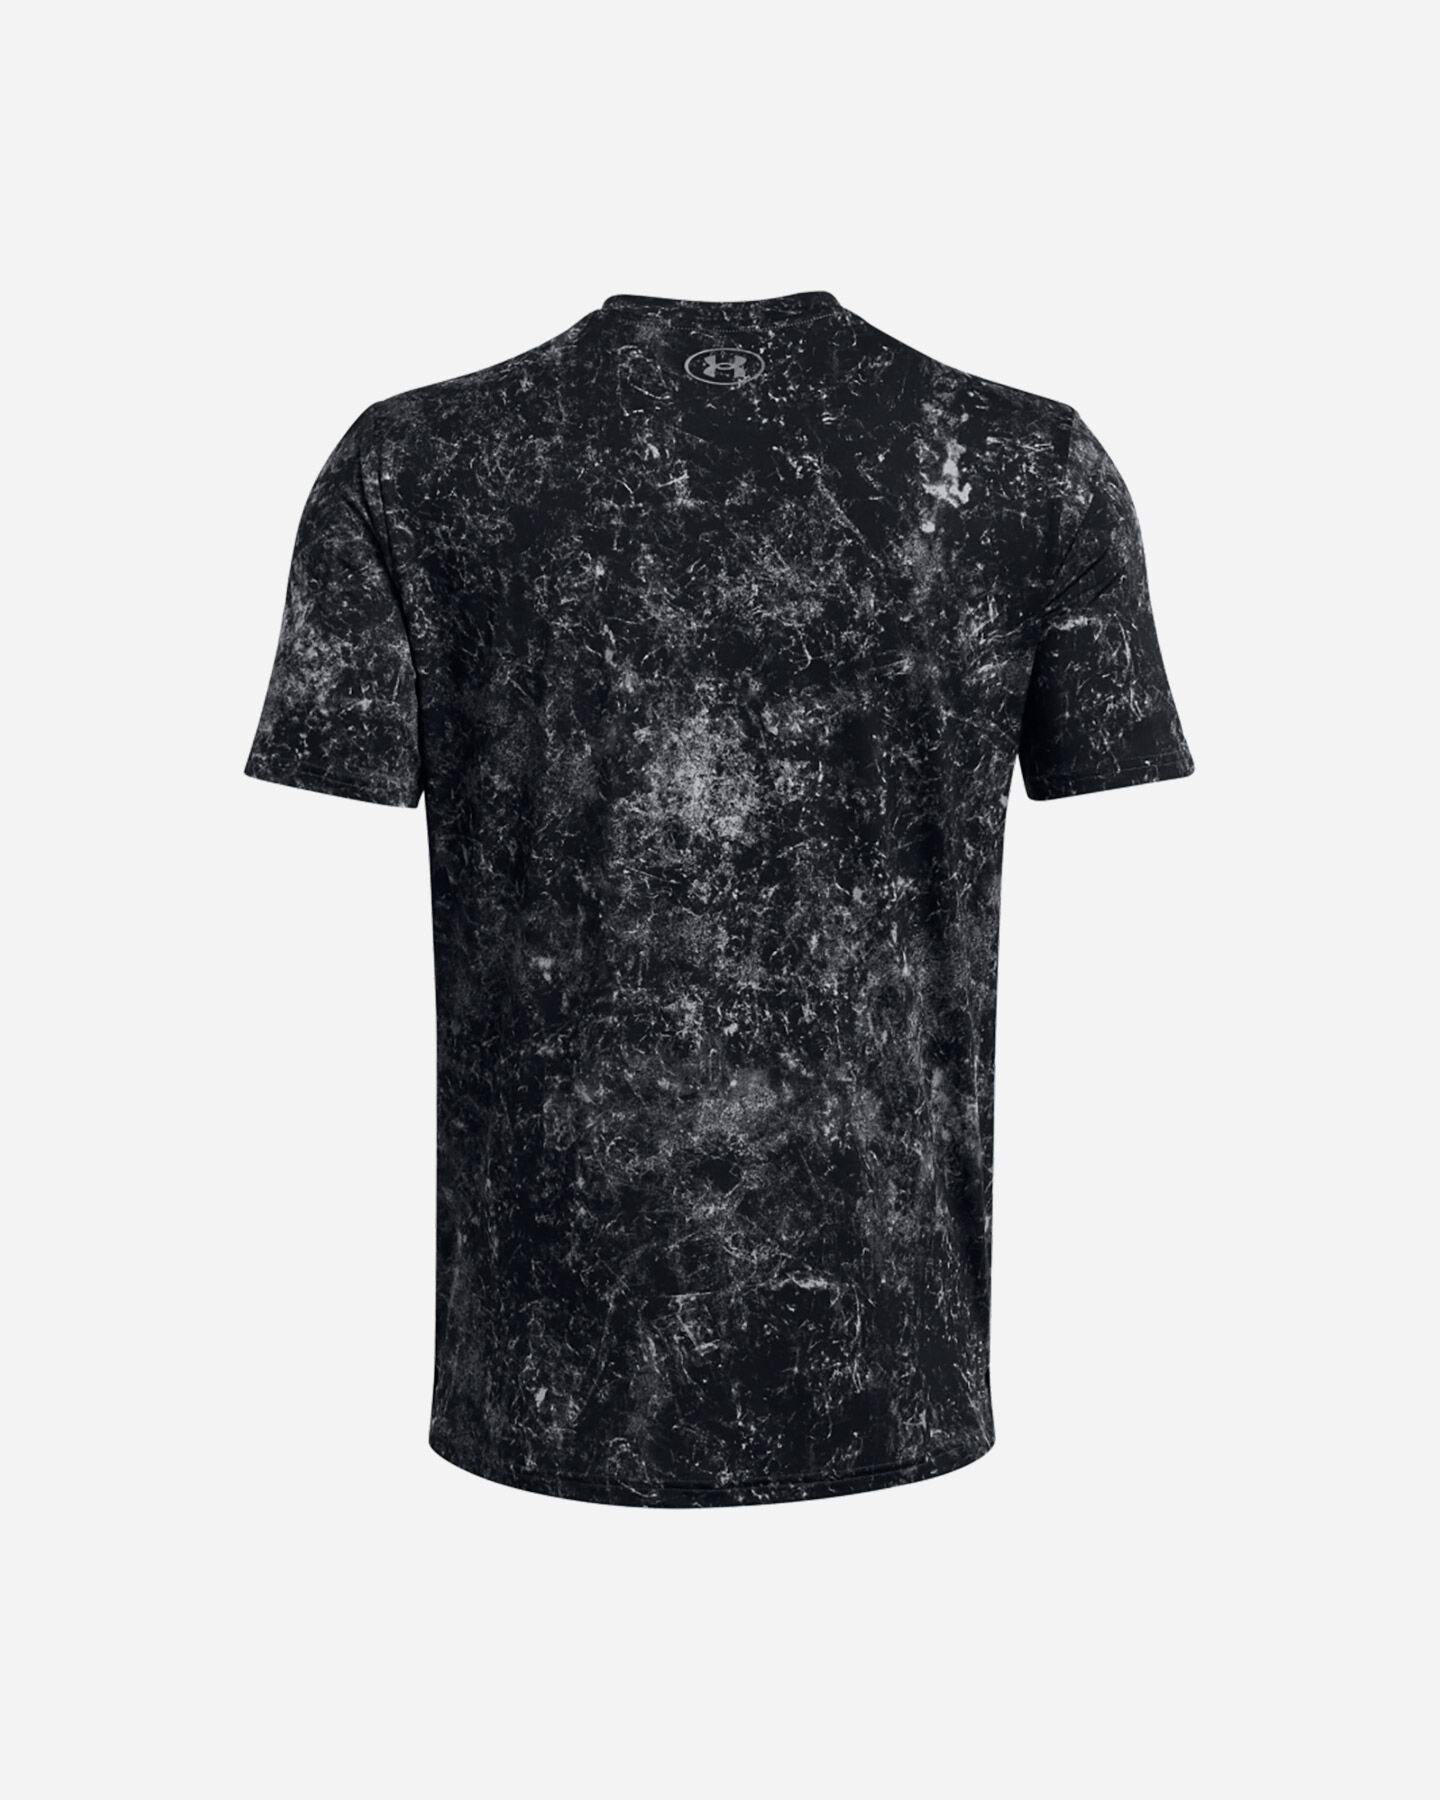  T-Shirt training UNDER ARMOUR VANISH ENERGY PRINTED M S5642093|0025|SM scatto 1